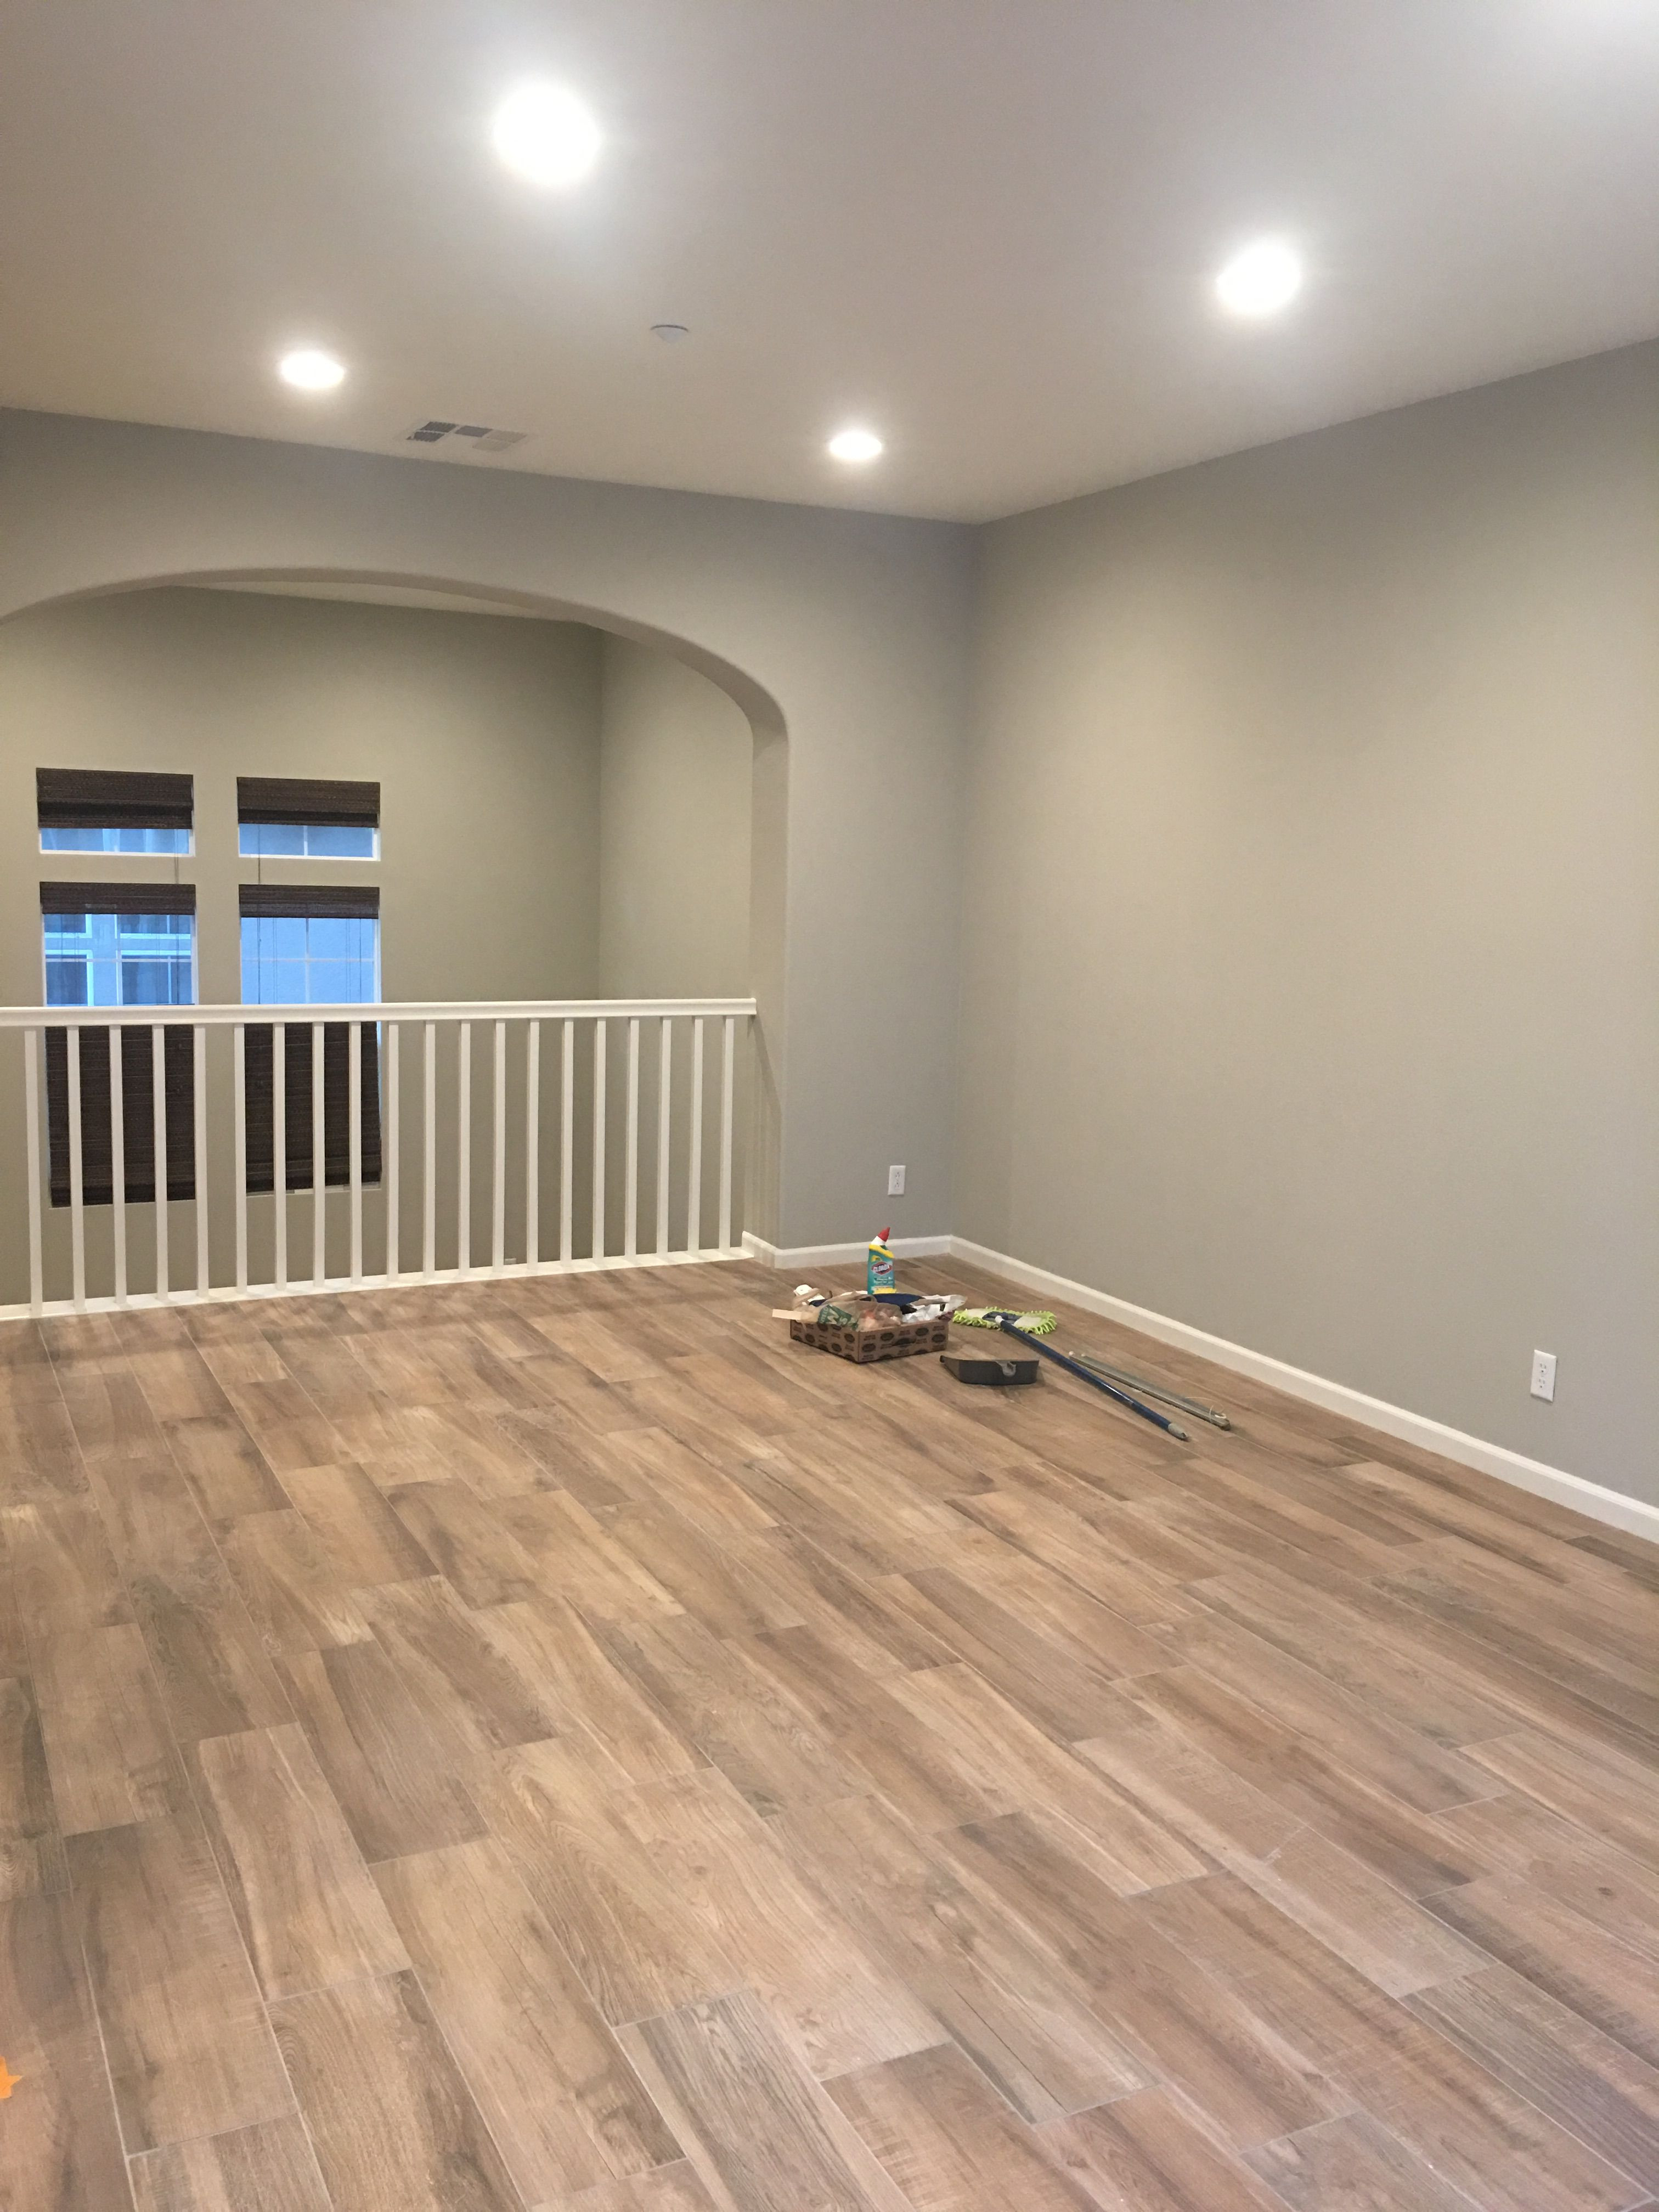 Hardwood Floor Color Trends 2018 Of How to Get Paint Off Of Hardwood Floors Floor Regarding How to Get Paint Off Of Hardwood Floors Benjamin Moore Wall Color Revere Pewter and Wood